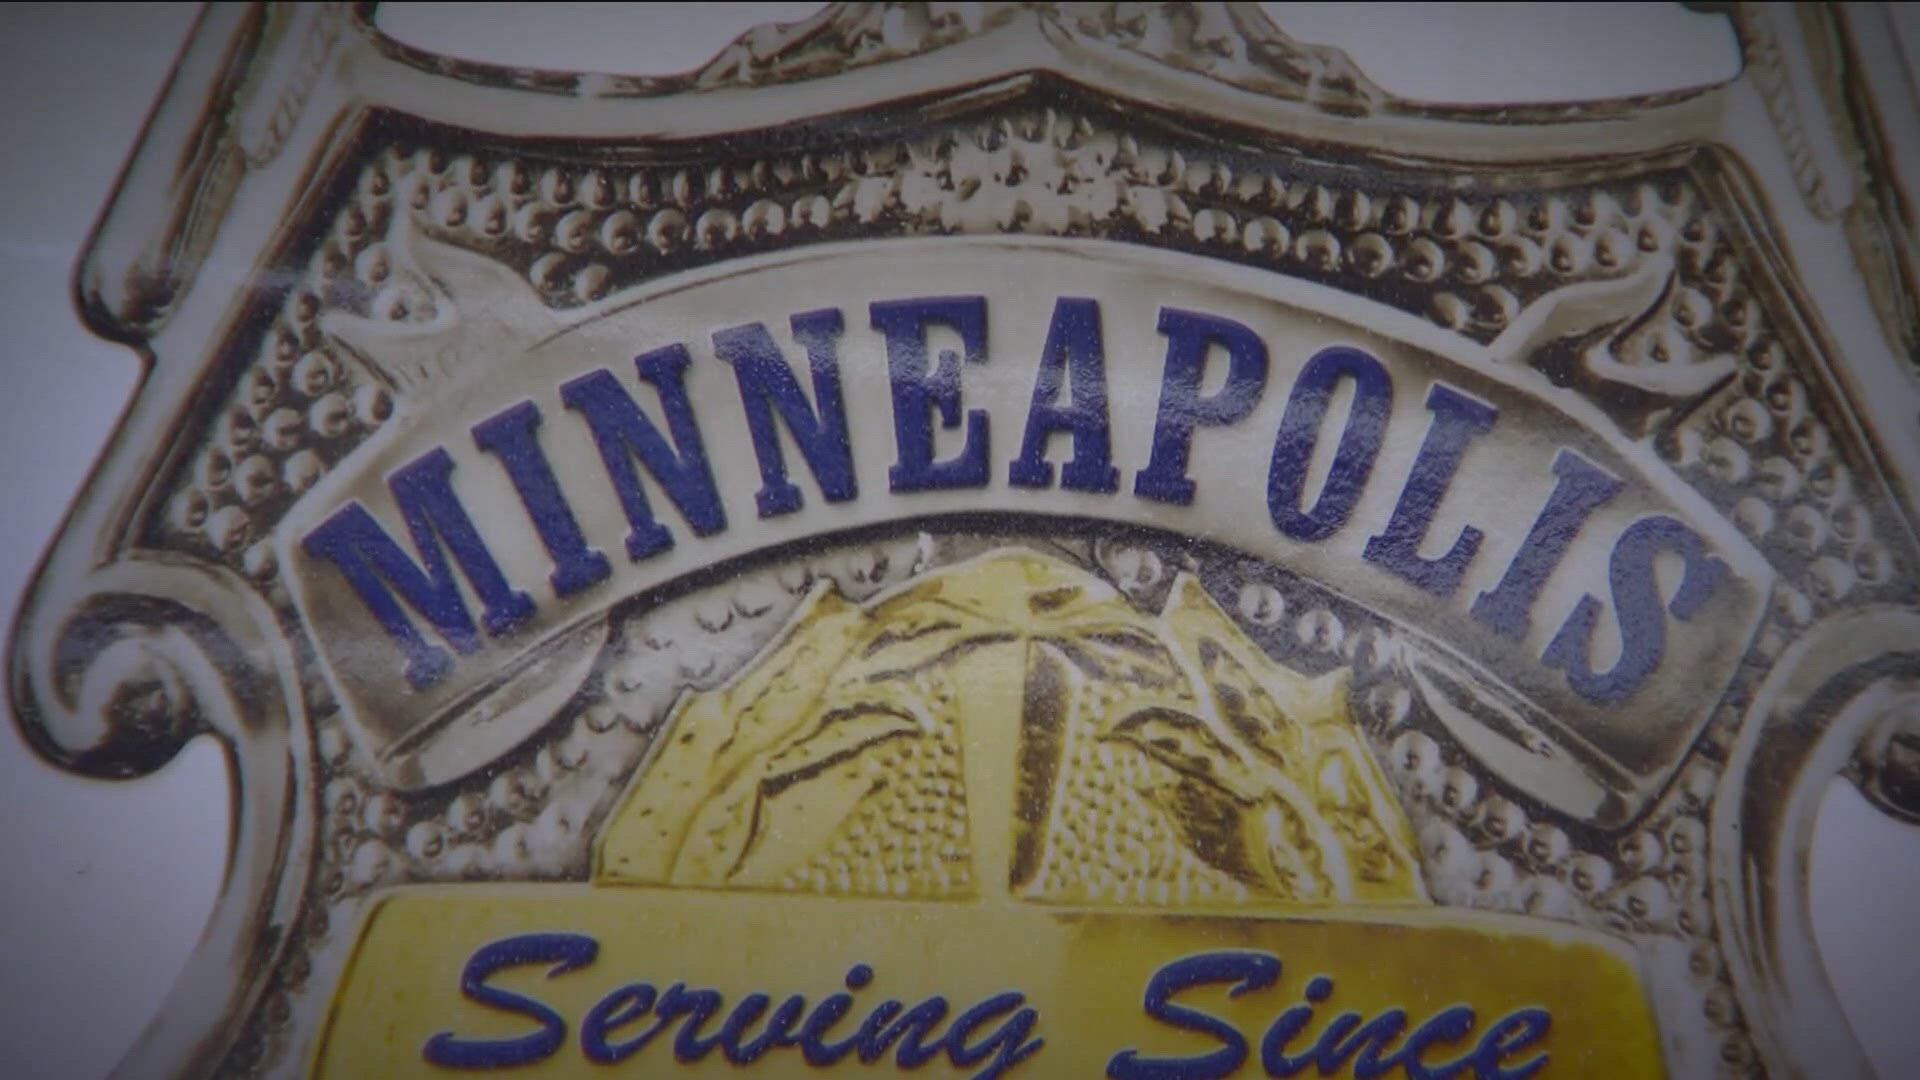 The council voted 8-5 Friday during a special meeting held by Minneapolis Mayor Jacob Frey.